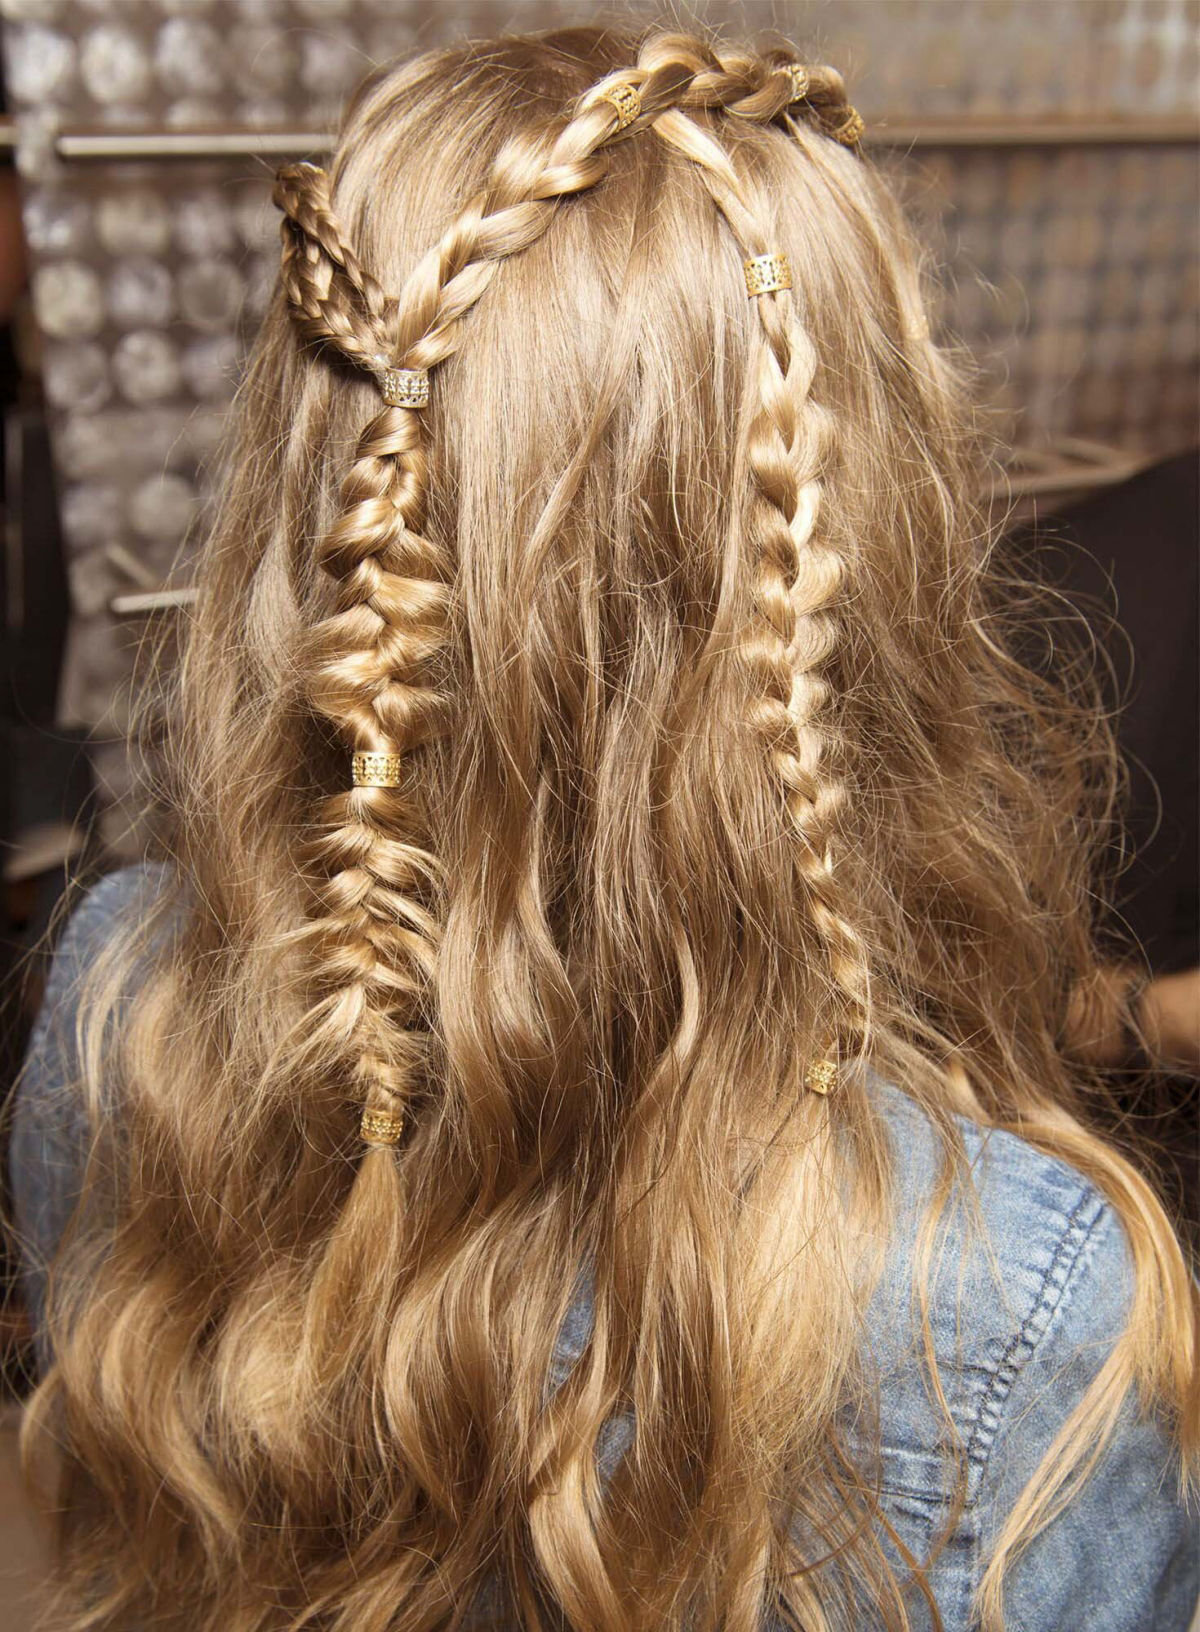 style half up braid hairstyle ideas celebrity streetstyle trends long insideout runway